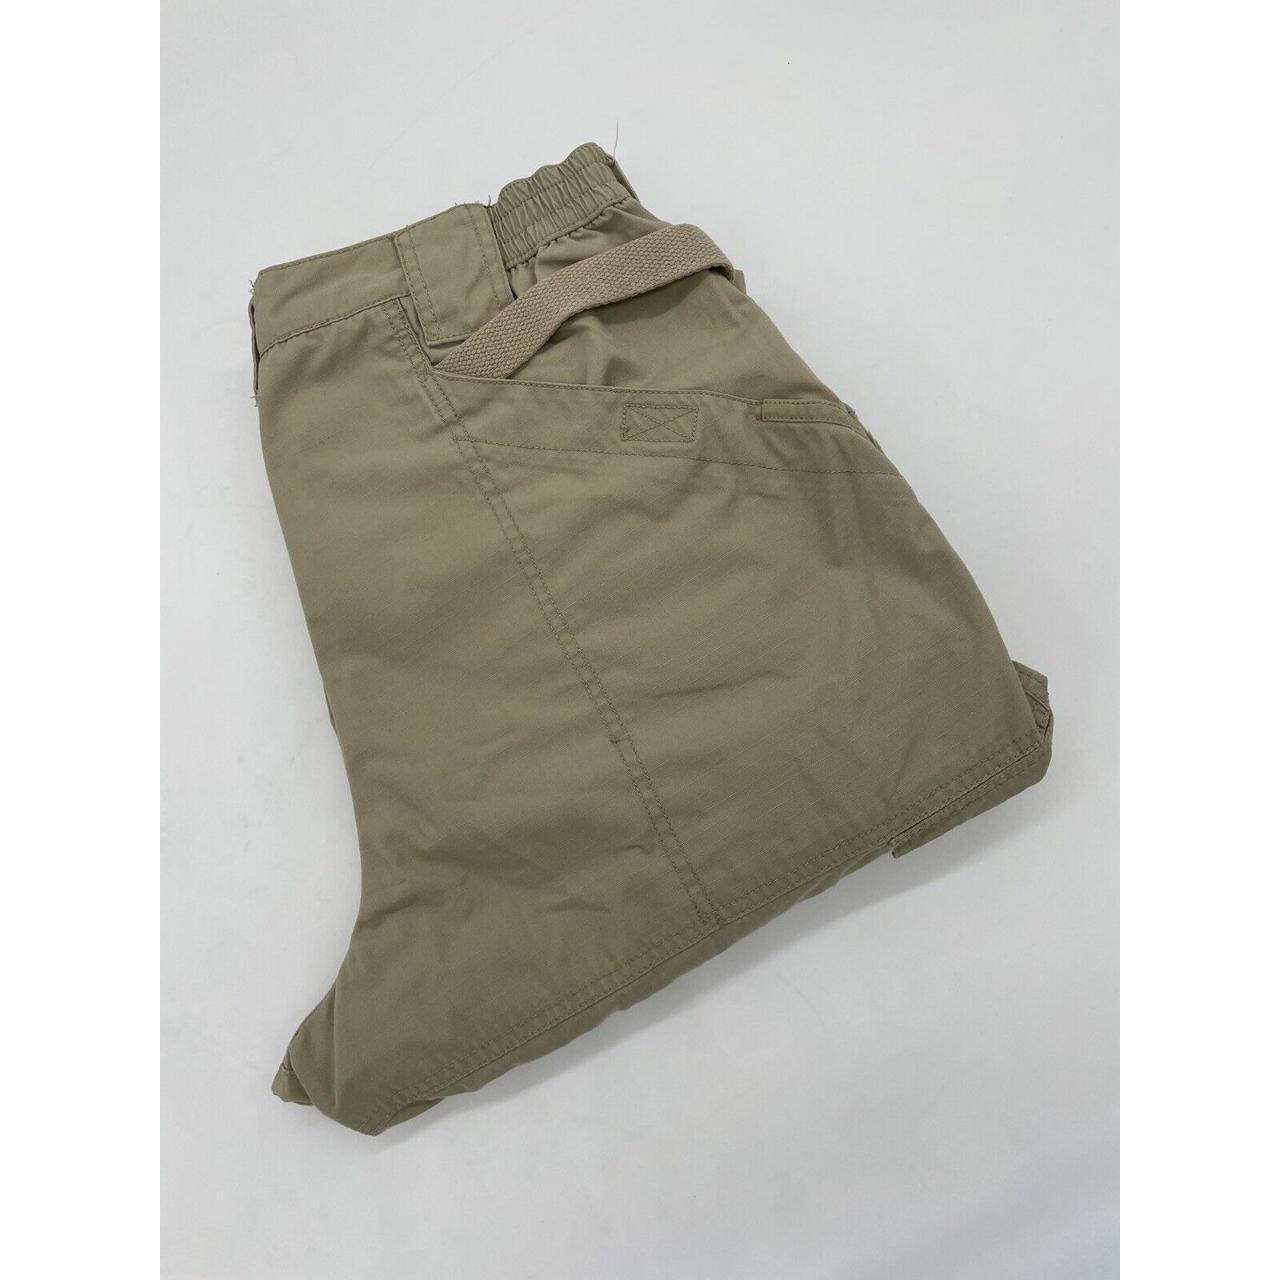 511 Tactical Philippines  FASTTAC TDU PANT item code 74462 511s  latest innovation comes to one of our most heavily used pants the TDU  FastTac use a lightweight 47 oz polyester ripstop